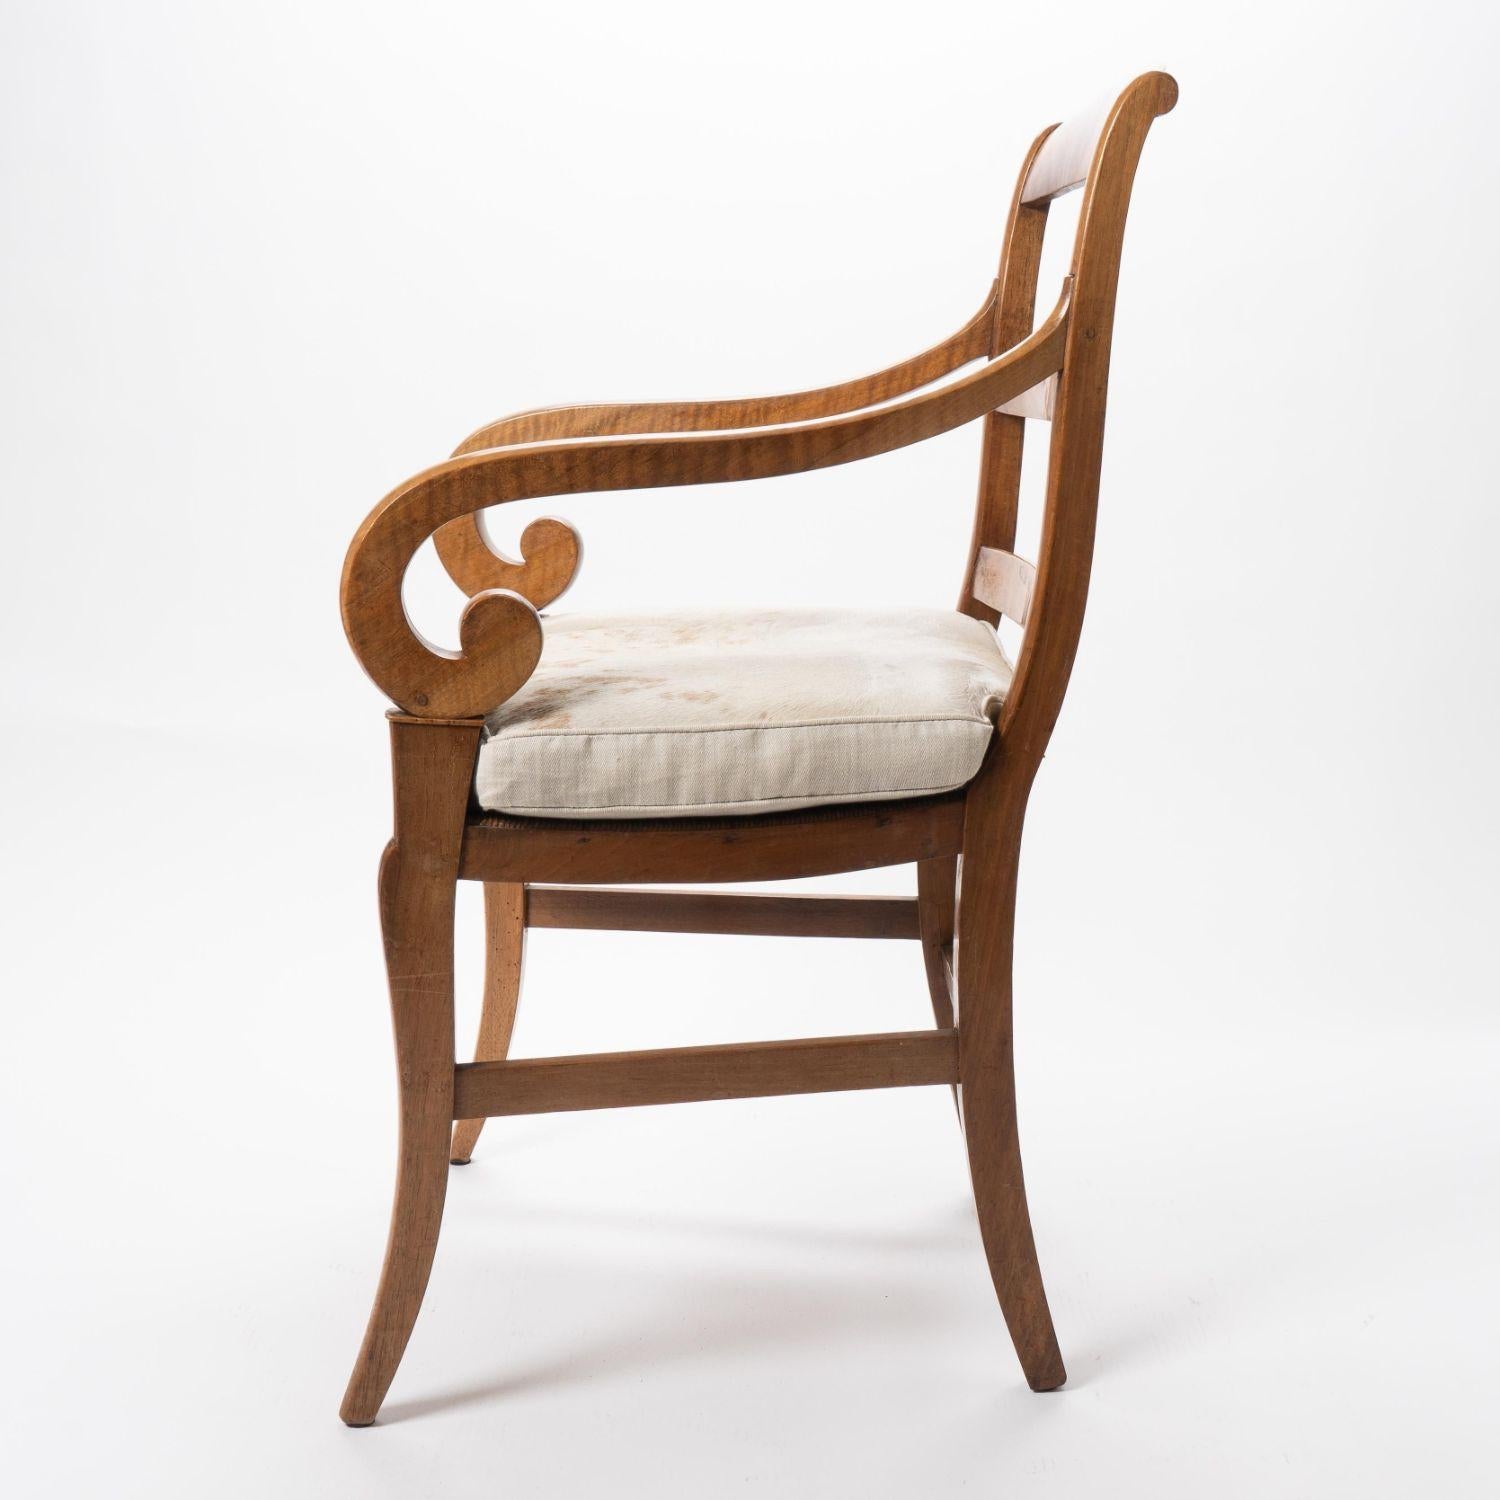 Louis Philippe French Cherry Wood Arm Chair with Rush Seat and Upholstered Cushion, c. 1830 For Sale